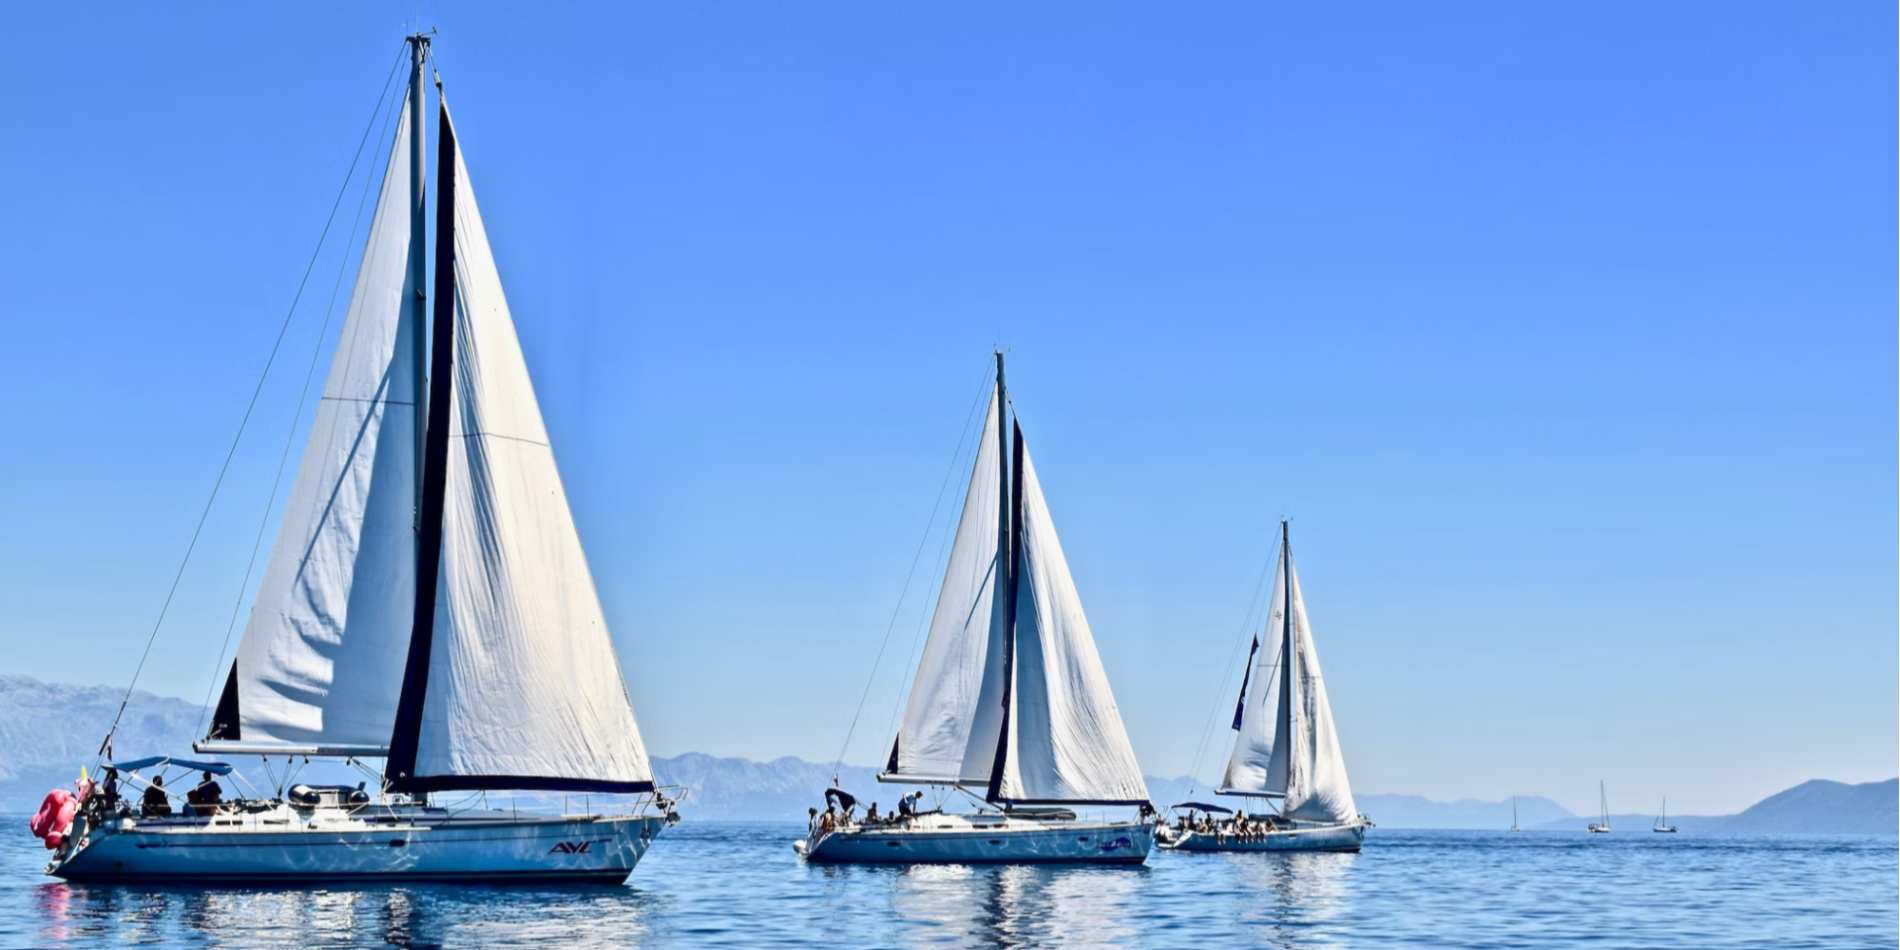 3 sailboats on the water during daytime